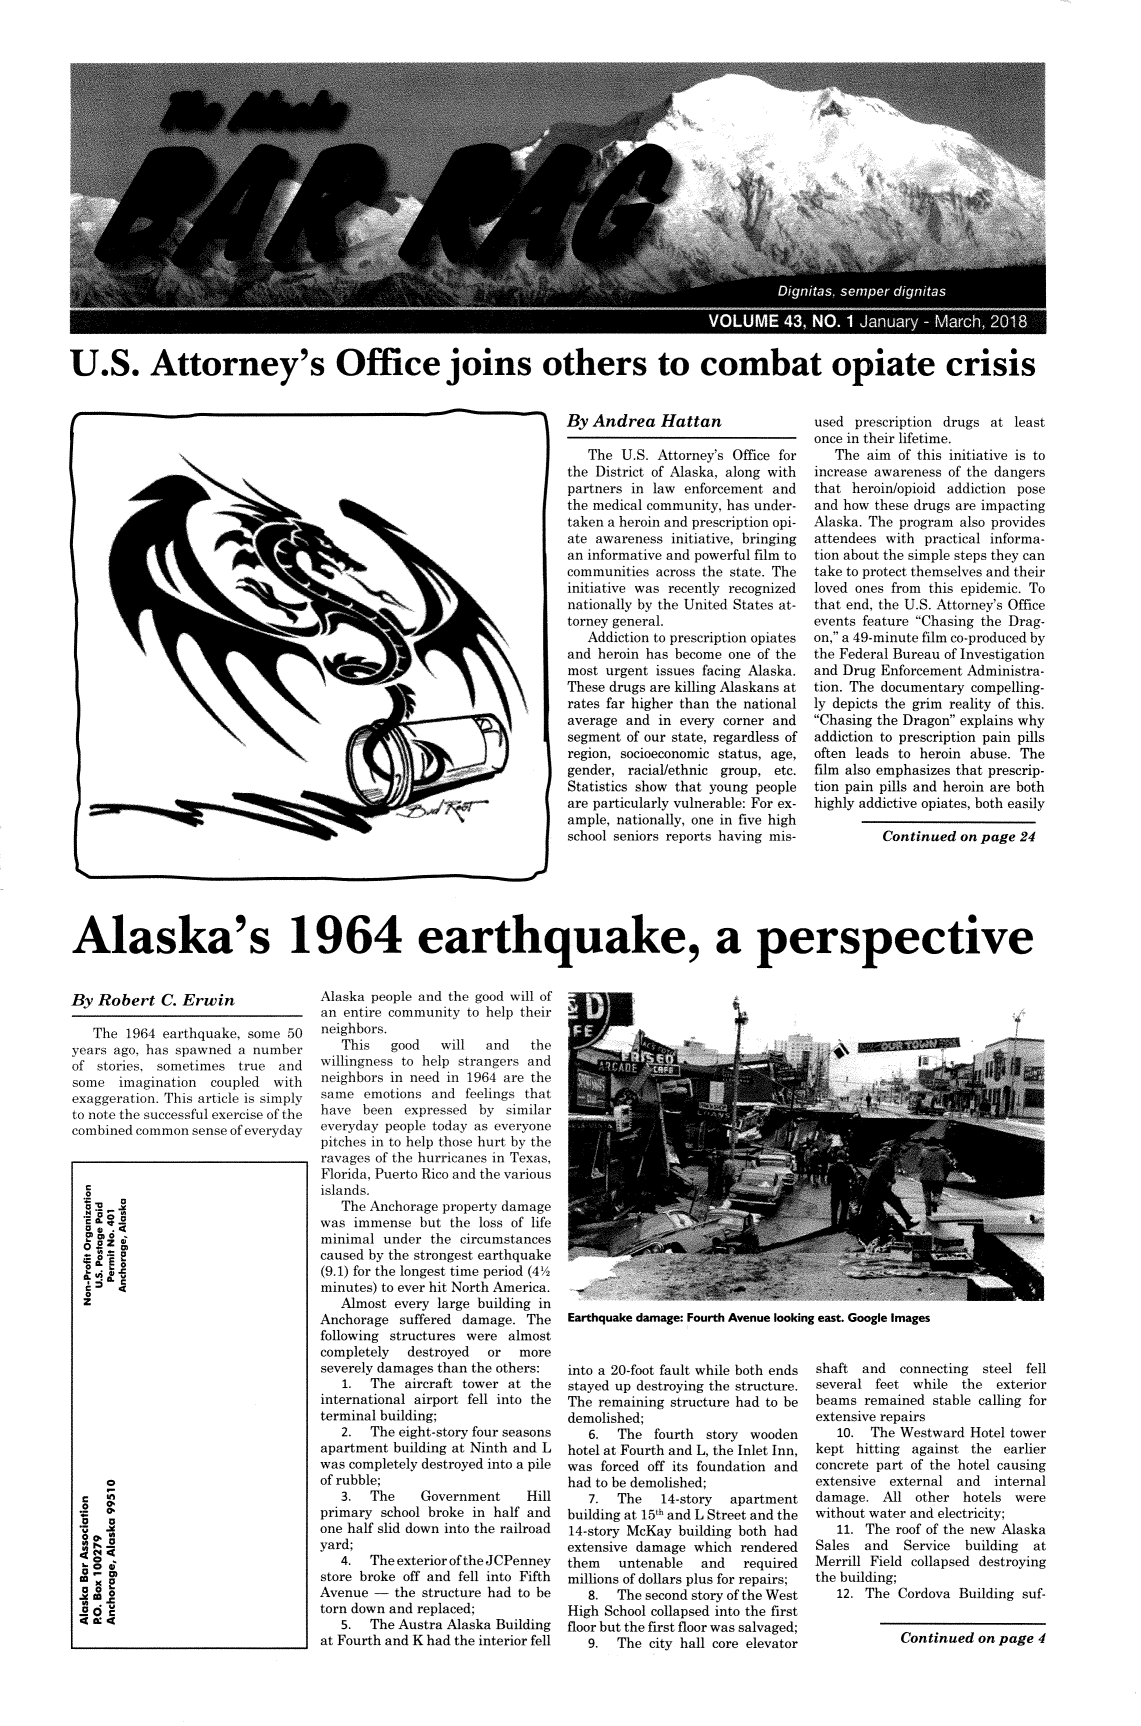 handle is hein.barjournals/askabar0042 and id is 1 raw text is: 





















U.S. Attorney's Office joins others to combat opiate crisis


By  Andrea   Hattan

   The  U.S. Attorney's Office for
the District of Alaska, along with
partners in law  enforcement and
the medical community, has under-
taken a heroin and prescription opi-
ate awareness  initiative, bringing
an informative and powerful film to
communities  across the state. The
initiative was recently recognized
nationally by the United States at-
torney general.
   Addiction to prescription opiates
and  heroin has become one of the
most  urgent issues facing Alaska.
These drugs are killing Alaskans at
rates far higher than the national
average  and in every corner and
segment  of our state, regardless of
region, socioeconomic status, age,
gender,  racial/ethnic group, etc.
Statistics show that young people
are particularly vulnerable: For ex-
ample, nationally, one in five high
school seniors reports having mis-


used  prescription drugs at  least
once in their lifetime.
   The  aim of this initiative is to
increase awareness of the dangers
that  heroin/opioid addiction pose
and how  these drugs are impacting
Alaska. The program  also provides
attendees with  practical informa-
tion about the simple steps they can
take to protect themselves and their
loved ones from this epidemic. To
that end, the U.S. Attorney's Office
events feature Chasing the Drag-
on, a 49-minute film co-produced by
the Federal Bureau of Investigation
and Drug  Enforcement Administra-
tion. The documentary  compelling-
ly depicts the grim reality of this.
Chasing the Dragon explains why
addiction to prescription pain pills
often leads to heroin abuse.  The
film also emphasizes that prescrip-
tion pain pills and heroin are both
highly addictive opiates, both easily


Alaska's 1964 earthquake, a perspective


By  Robert   C. Erwin

   The  1964 earthquake, some  50
years ago, has spawned  a number
of  stories, sometimes  true  and
some   imagination  coupled  with
exaggeration. This article is simply
to note the successful exercise of the
combined common  sense of everyday


Alaska people and the good will of
an entire community  to help their
neighbors.
   This   good   will   and   the
willingness to help strangers and
neighbors in need in 1964 are the
same  emotions  and  feelings that
have  been  expressed  by  similar
everyday people today as everyone
pitches in to help those hurt by the
ravages of the hurricanes in Texas,
Florida, Puerto Rico and the various
islands.
   The Anchorage  property damage
was  immense  but  the loss of life
minimal  under  the circumstances
caused by the strongest earthquake
(9.1) for the longest time period (42
minutes) to ever hit North America.
   Almost  every large building in
Anchorage  suffered damage.   The
following structures were  almost
completely   destroyed  or   more
severely damages than the others:
   1.  The  aircraft tower at the
international airport fell into the
terminal building;
   2.  The eight-story four seasons
apartment  building at Ninth and L
was completely destroyed into a pile
of rubble;
   3.  The     Government     Hill
primary  school broke in half and
one half slid down into the railroad
yard;
   4.  The exterior of the JCPenney
store broke off and fell into Fifth
Avenue  -  the structure had to be
torn down and replaced;
   5.  The Austra Alaska Building
at Fourth and K had the interior fell


Earthquake damage: Fourth Avenue looking east. Google Images


into a 20-foot fault while both ends
stayed up destroying the structure.
The remaining  structure had to be
demolished;
   6.  The  fourth  story wooden
hotel at Fourth and L, the Inlet Inn,
was  forced off its foundation and
had to be demolished;
   7.  The   14-story  apartment
building at 15th and L Street and the
14-story McKay  building both had
extensive damage  which  rendered
them   untenable   and   required
millions of dollars plus for repairs;
   8.  The second story of the West
High School collapsed into the first
floor but the first floor was salvaged;
   9.  The  city hall core elevator


shaft  and  connecting  steel fell
several  feet while  the  exterior
beams  remained  stable calling for
extensive repairs
   10.  The Westward  Hotel tower
kept  hitting against the  earlier
concrete part of the hotel causing
extensive  external and   internal
damage.   All other  hotels  were
without water and electricity;
   11. The  roof of the new Alaska
Sales  and   Service building  at
Merrill Field collapsed destroying
the building;
   12. The  Cordova  Building suf-


Continued  on page  4


(


C I


0 9L
u
z










  r
  0~


  o 0


P


r


Continued  on page  24


